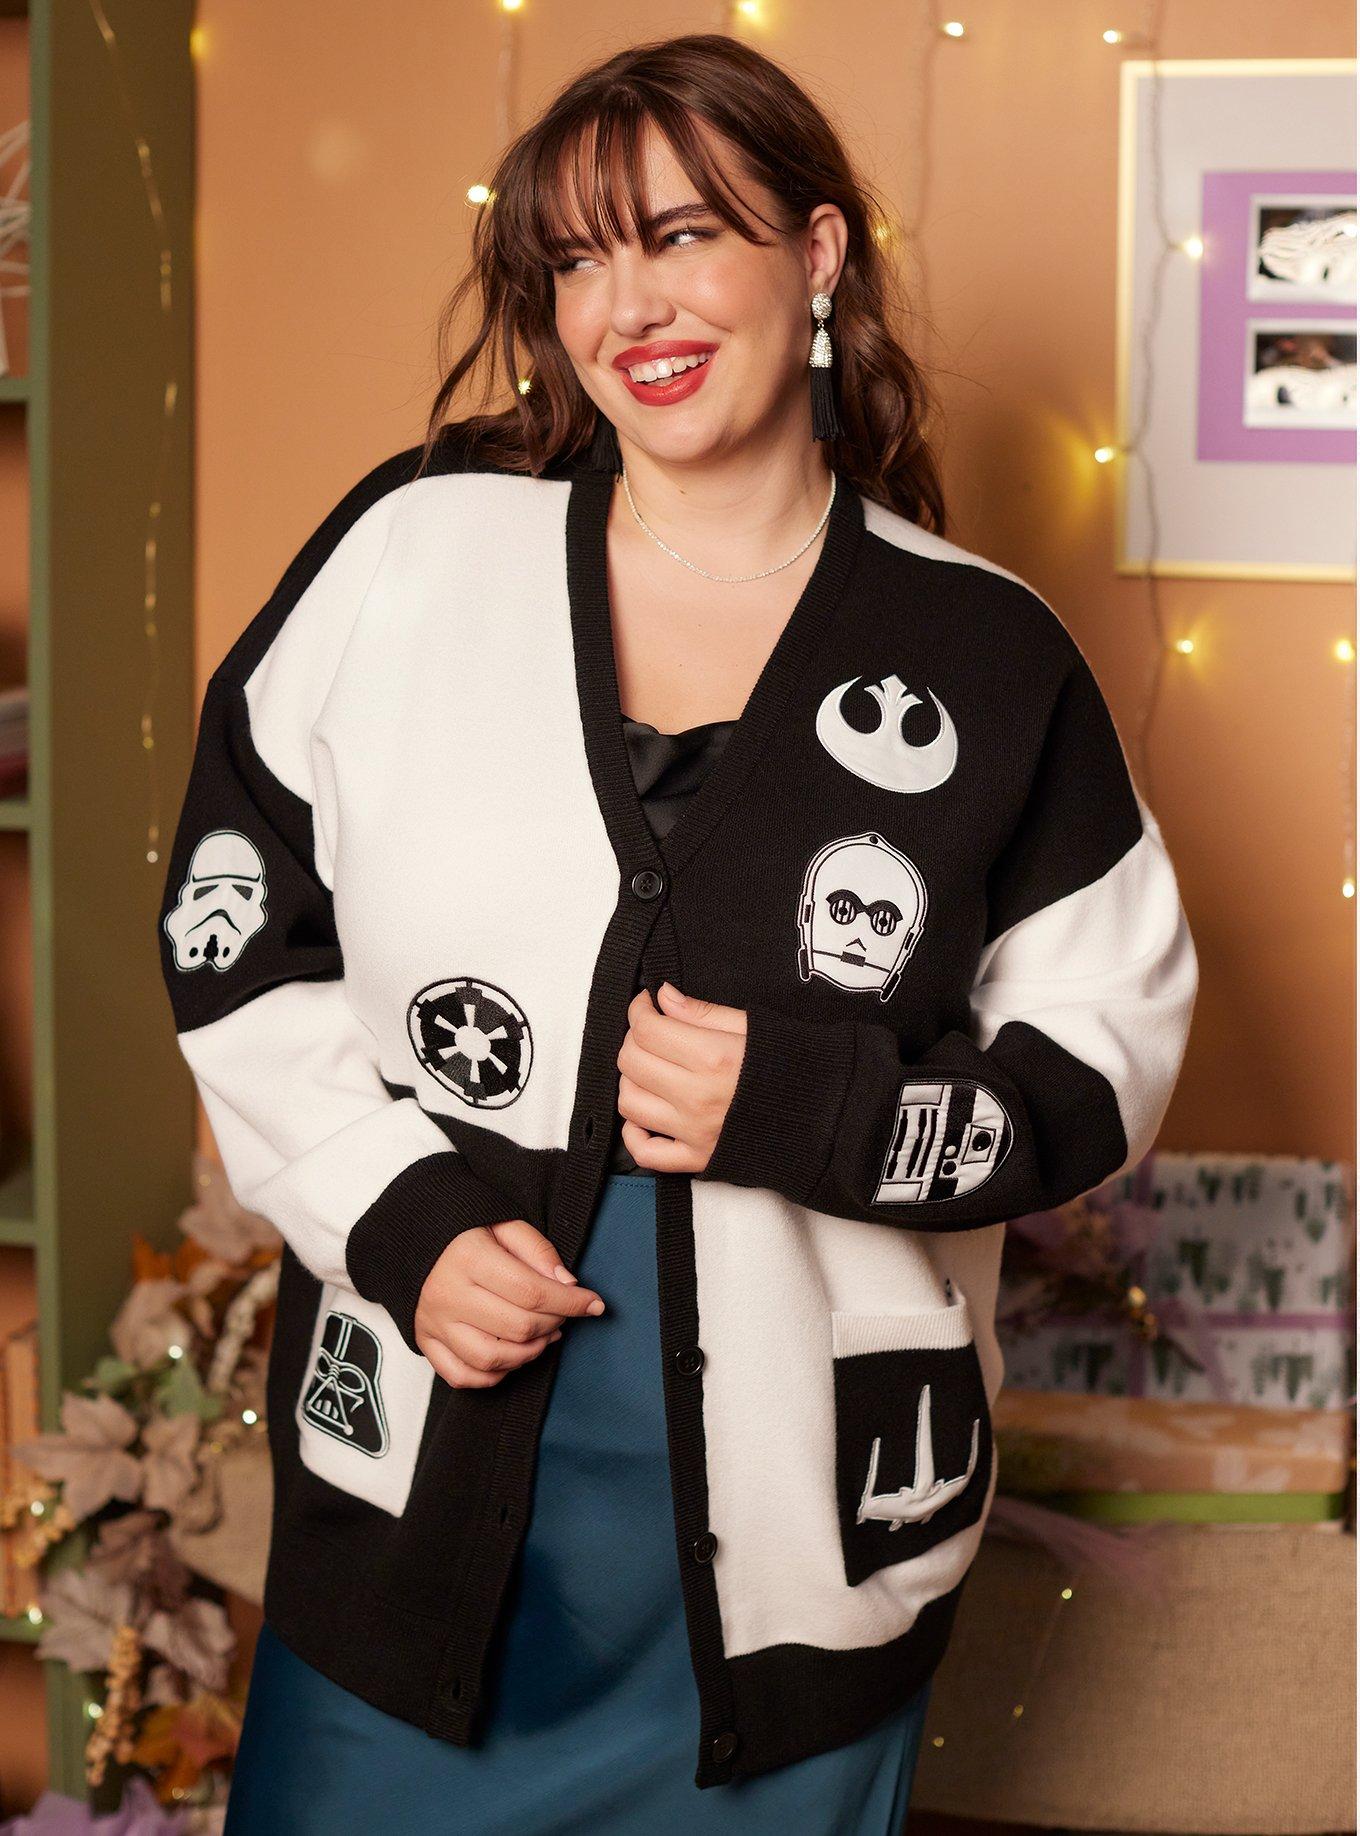 Her Universe Star Wars Rebel & Empire Icons Patchwork Cardigan Plus Size Her Universe Exclusive, BLACK  WHITE, hi-res